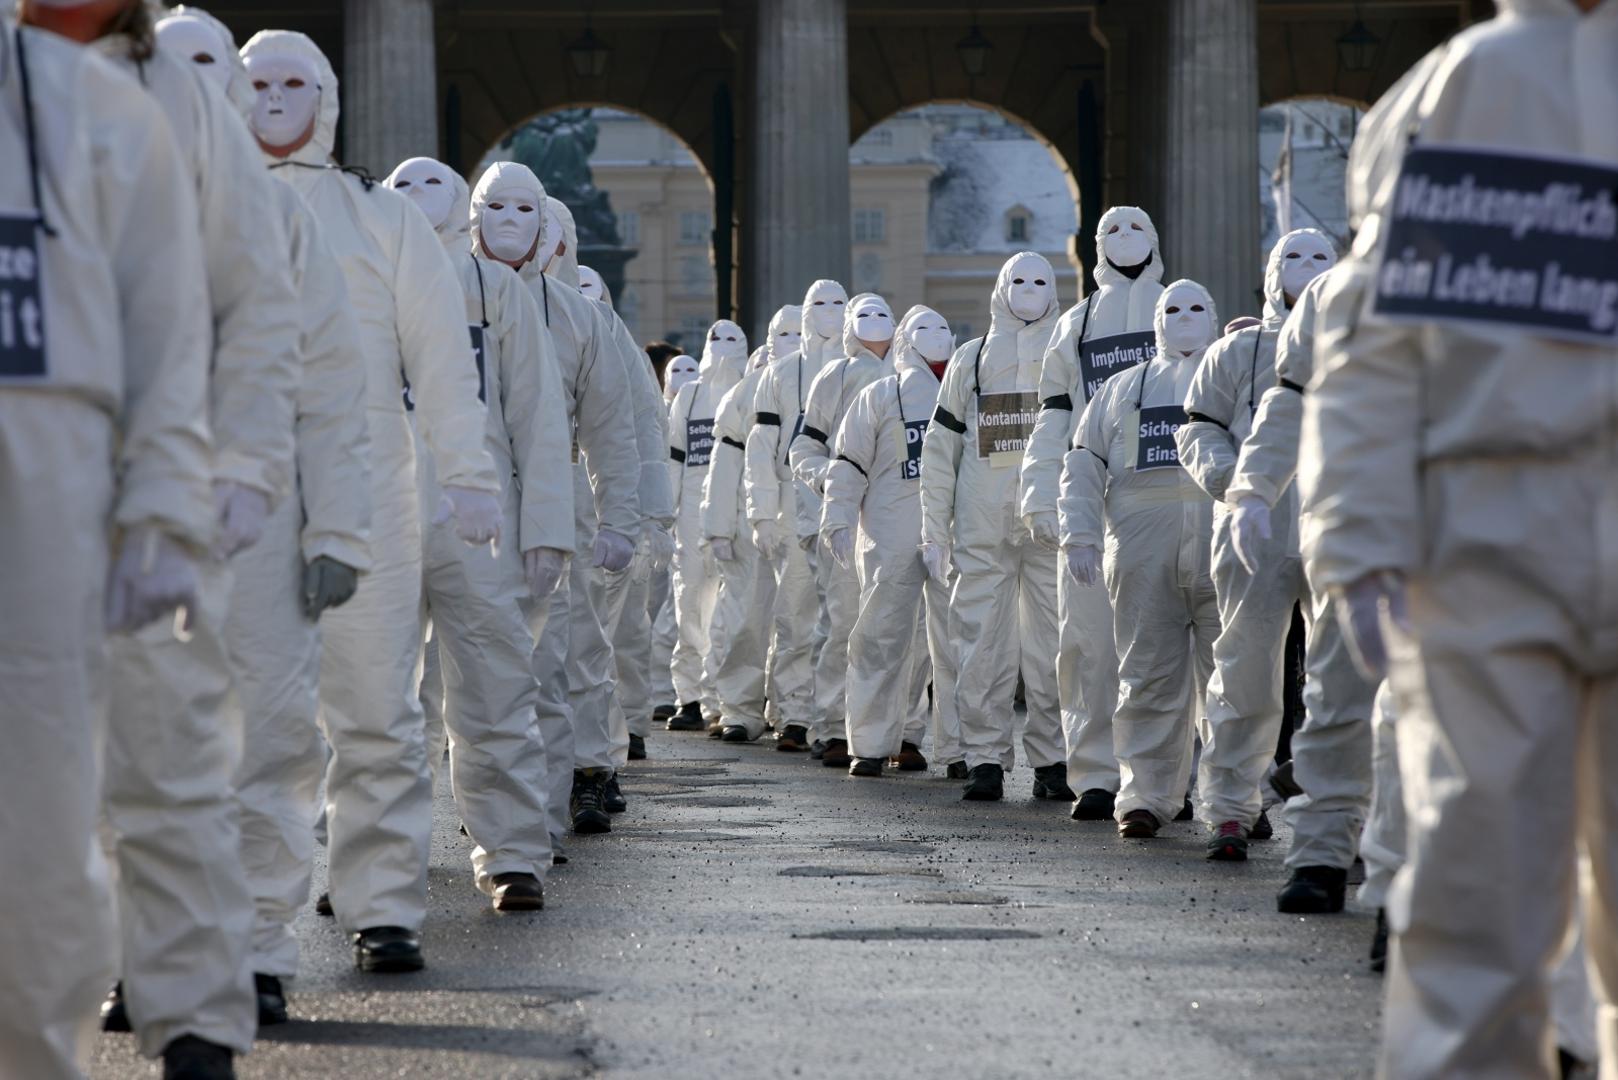 Demonstration against the COVID-19 measures and their economic consequences, in Vienna Protesters in white suits and wearing masks attend a demonstration against the coronavirus disease (COVID-19) measures and their economic consequences in Vienna, Austria, January 16, 2021. REUTERS/Lisi Niesner LISI NIESNER